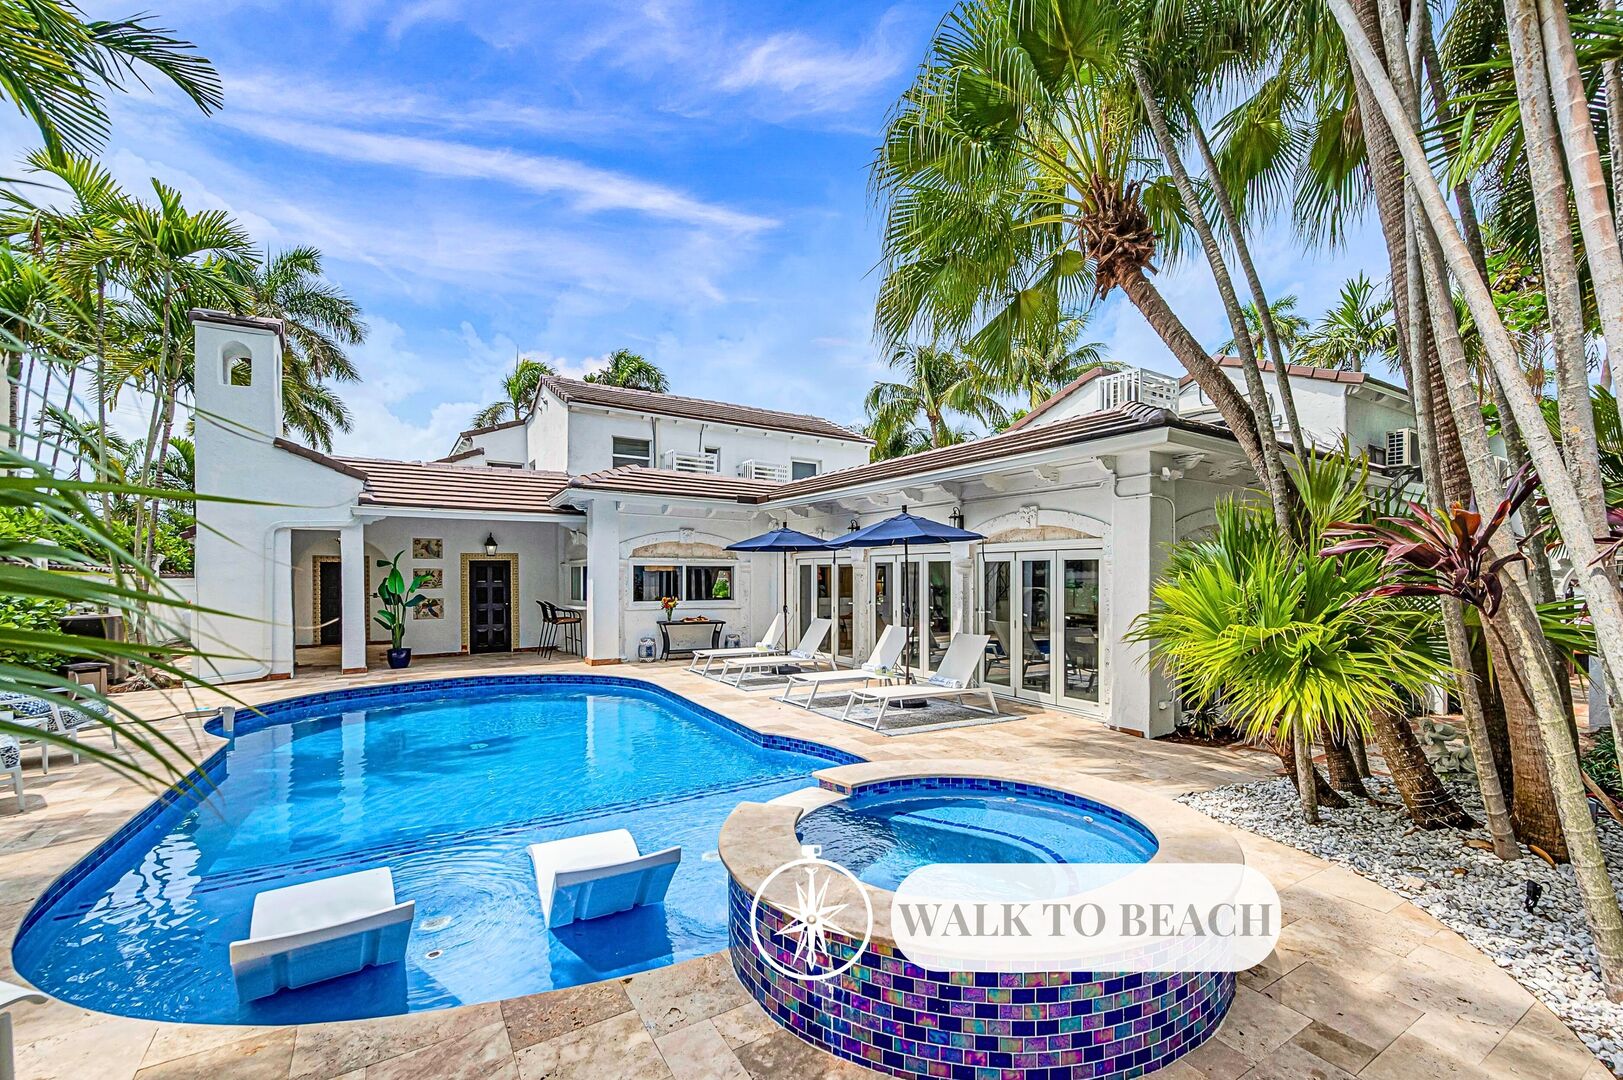 This historic Mediterranean-style coastal villa, nestled in the isles of Fort Lauderdale, is walking distance from the beach.